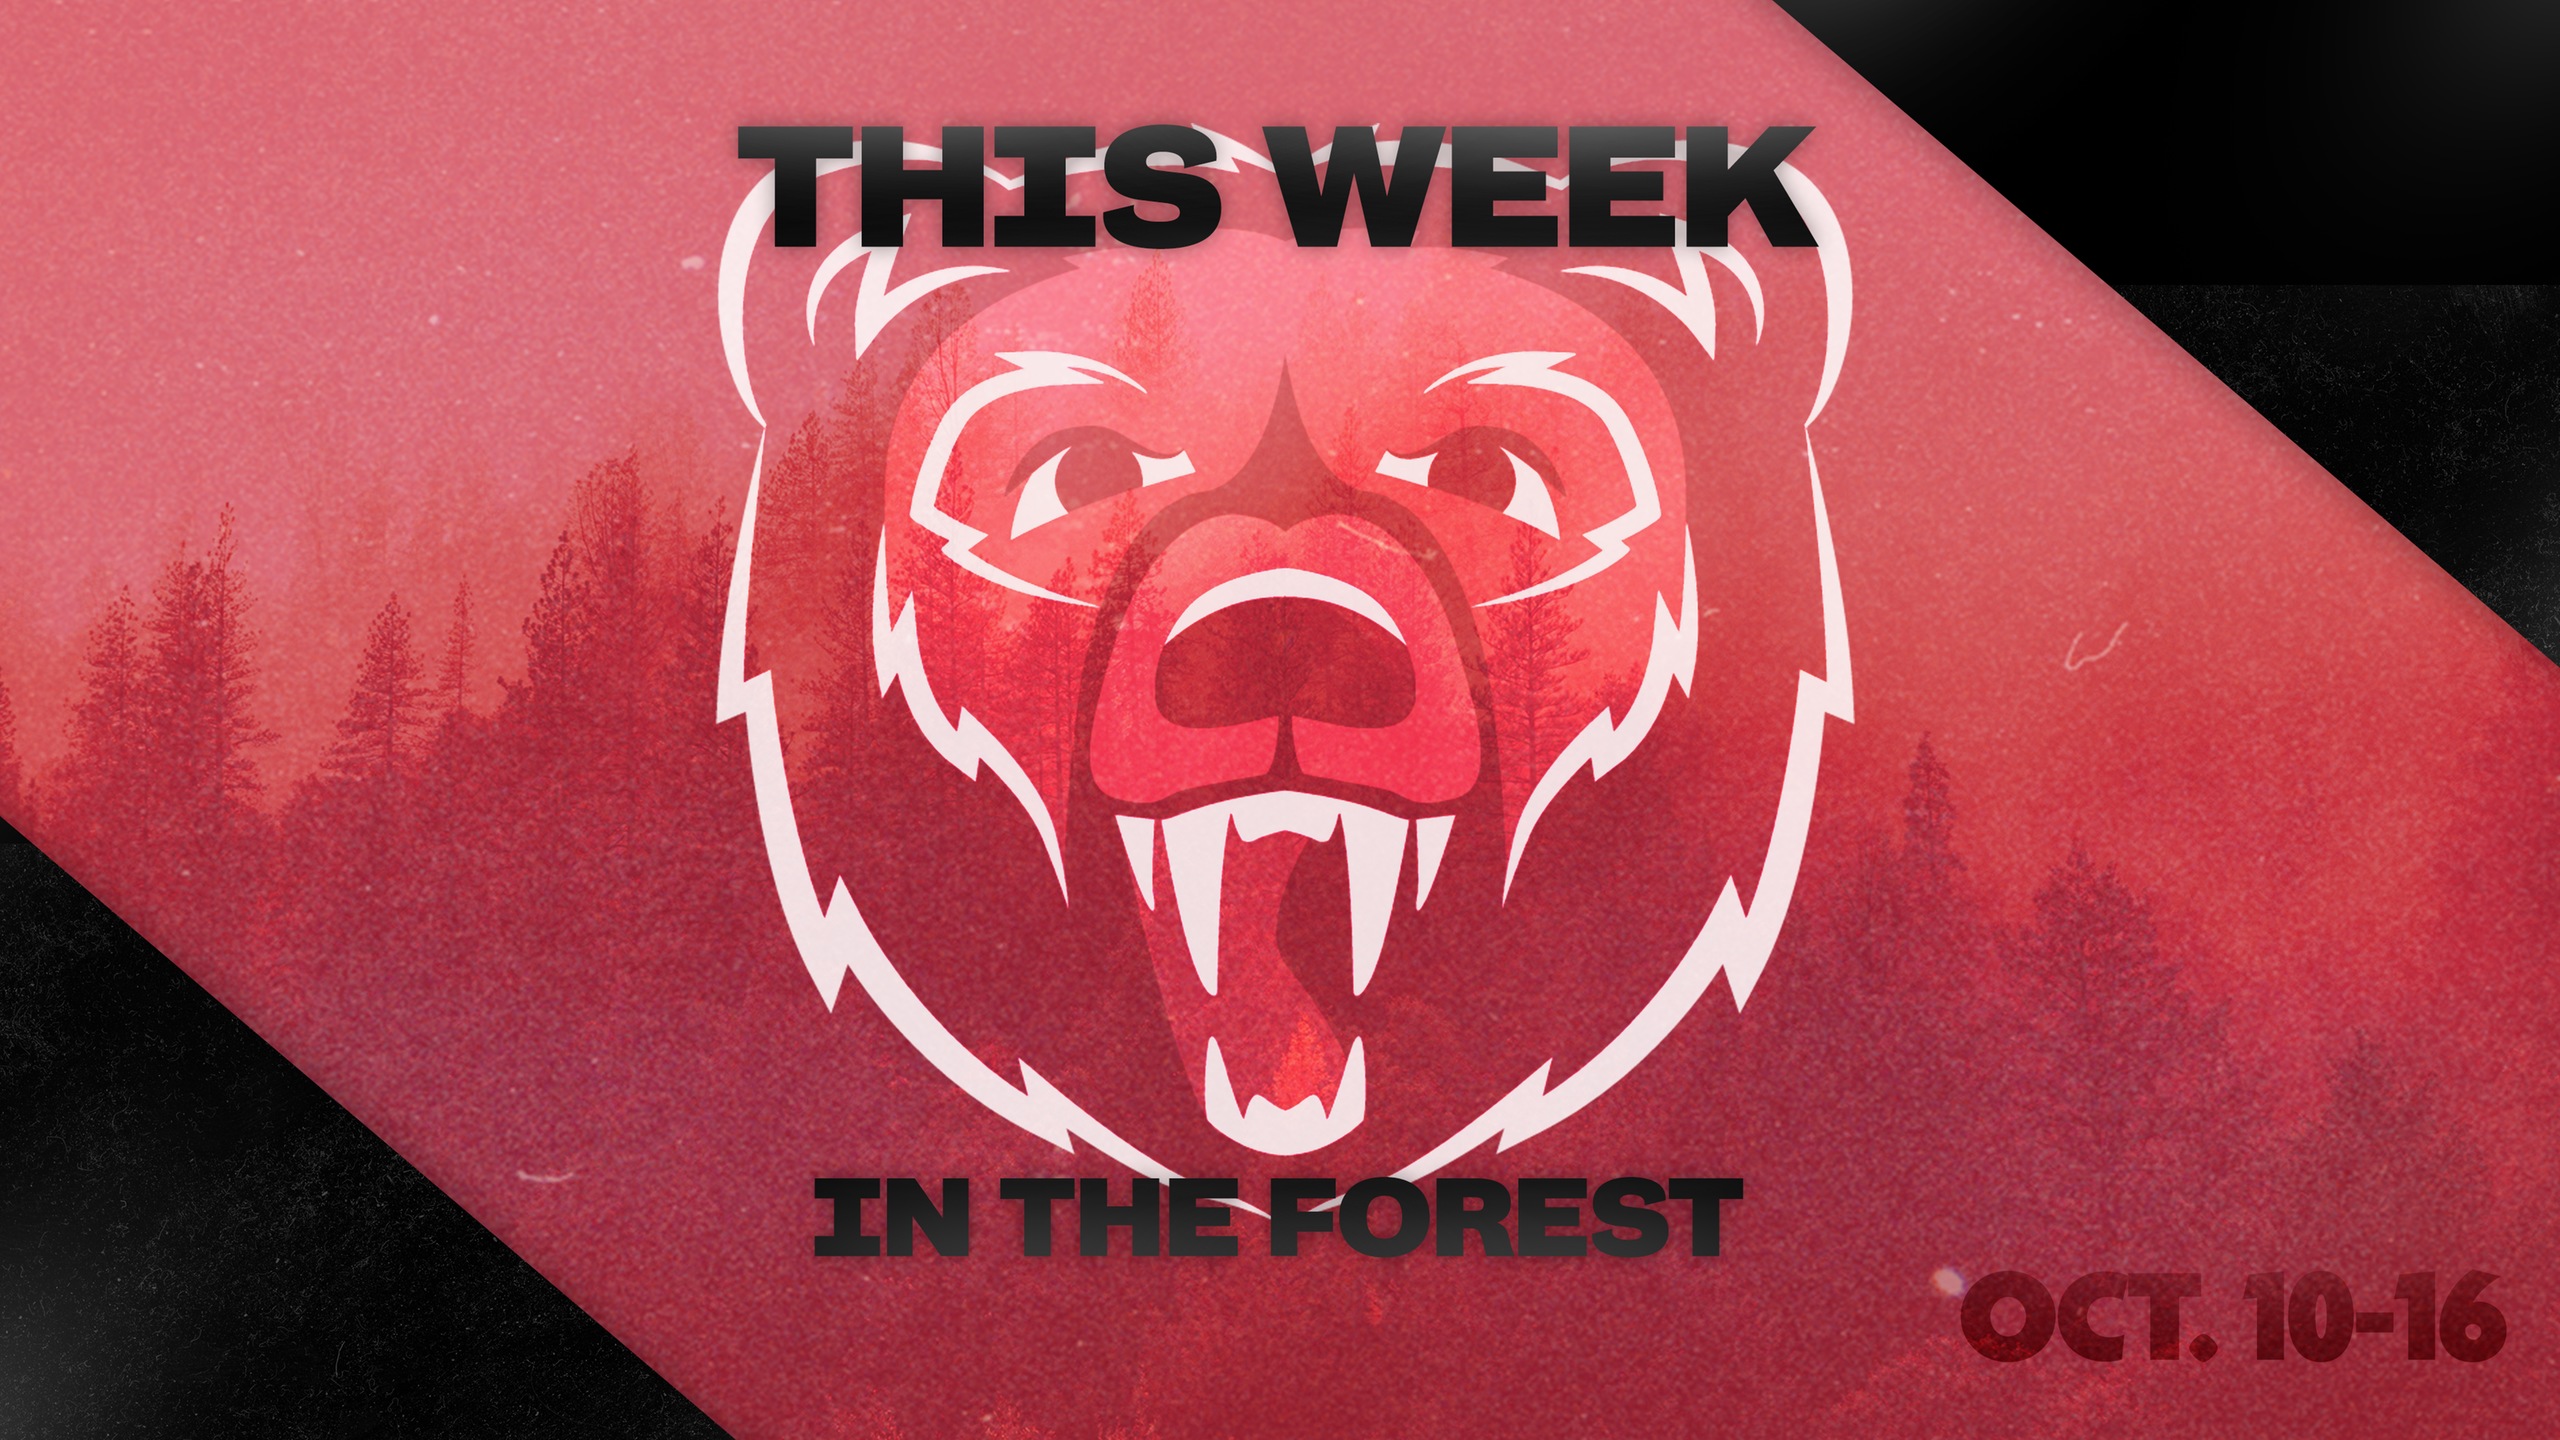 This Week in The Forest: Oct. 10-16